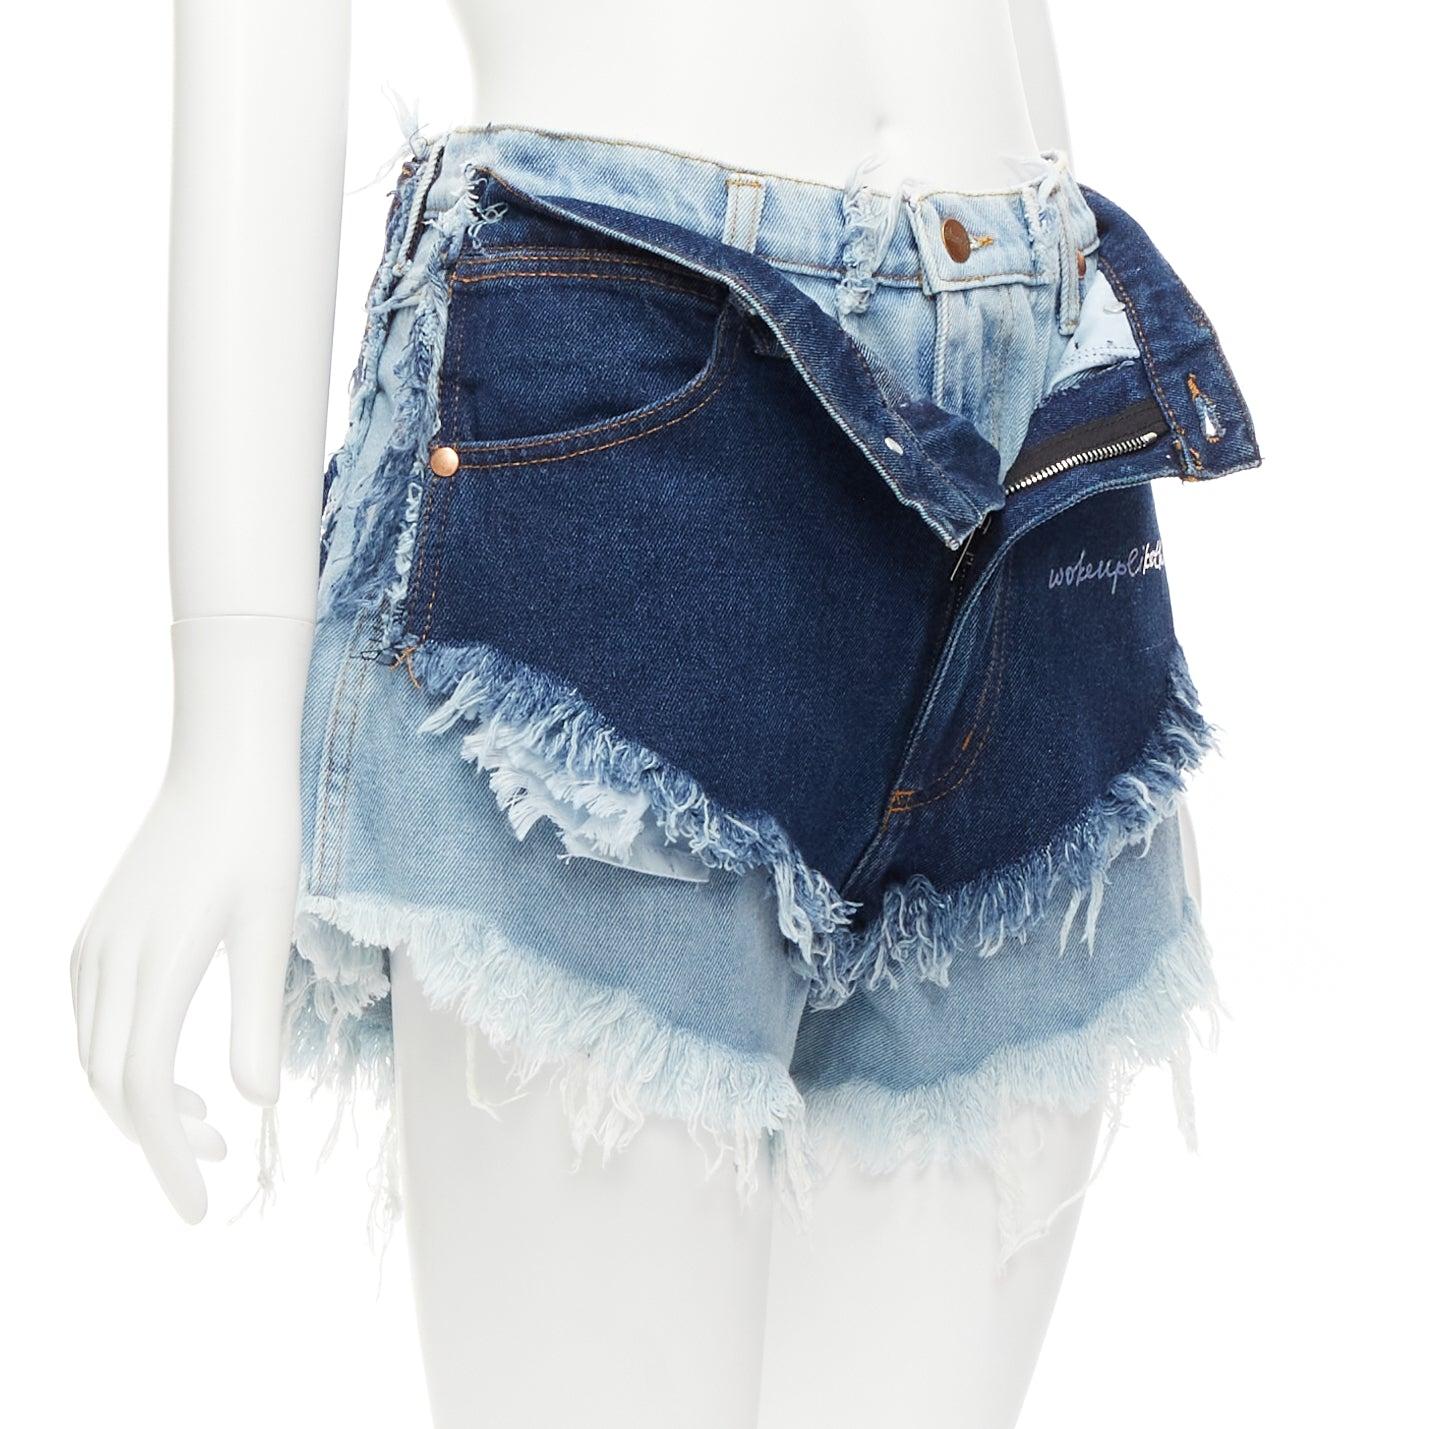 NATASHA ZINKO WRANGLER blue deconstructed layered double denim frayed shorts FR34 XS
Reference: AAWC/A00968
Brand: Natasha Zinko
Collection: Wrangler
Material: Denim
Color: Blue
Pattern: Solid
Closure: Zip Fly
Lining: Blue Fabric
Extra Details: